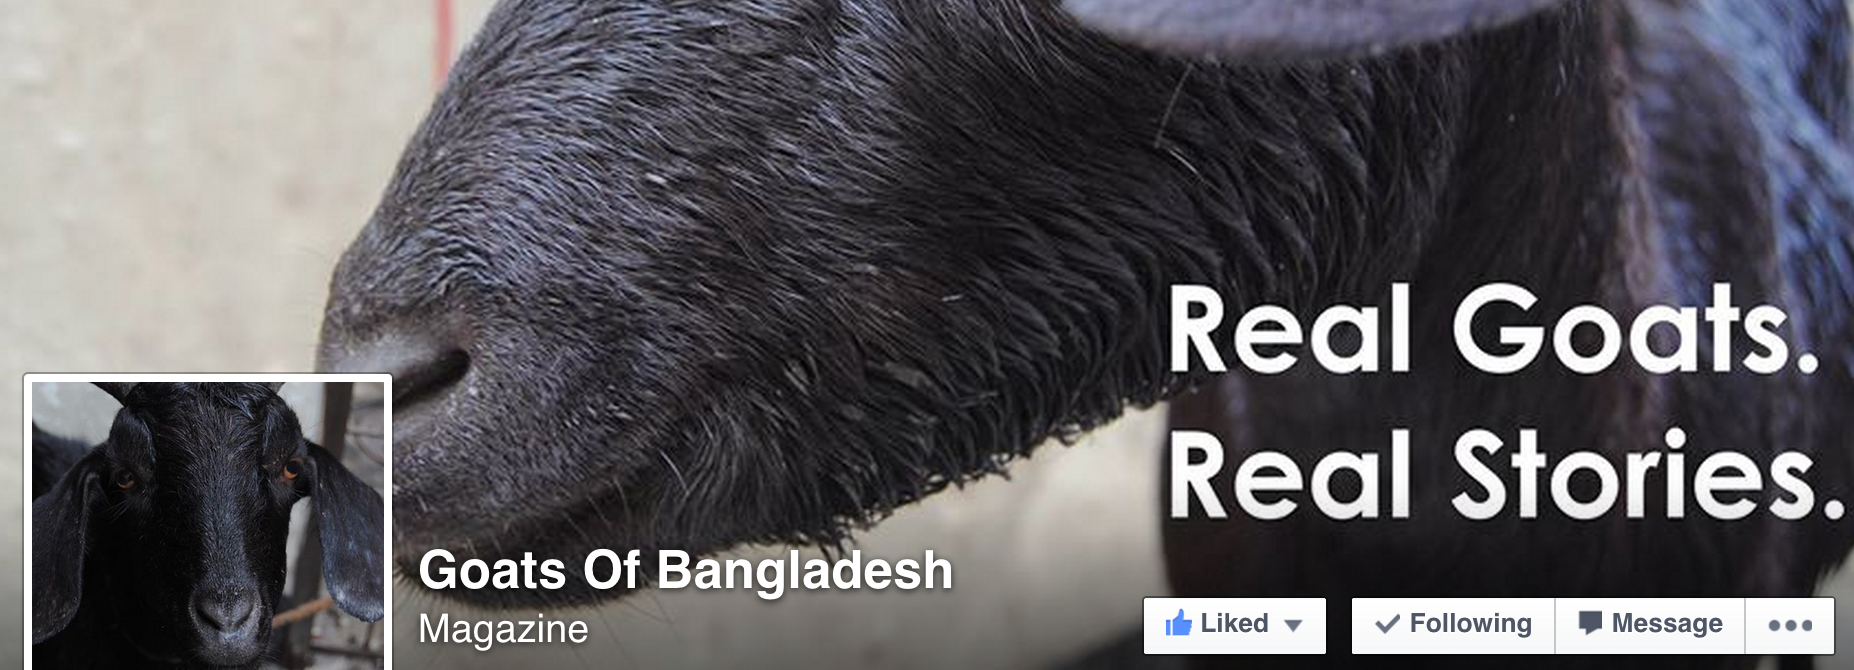 Screenshot from the Goats of Bangladesh Facebook Page